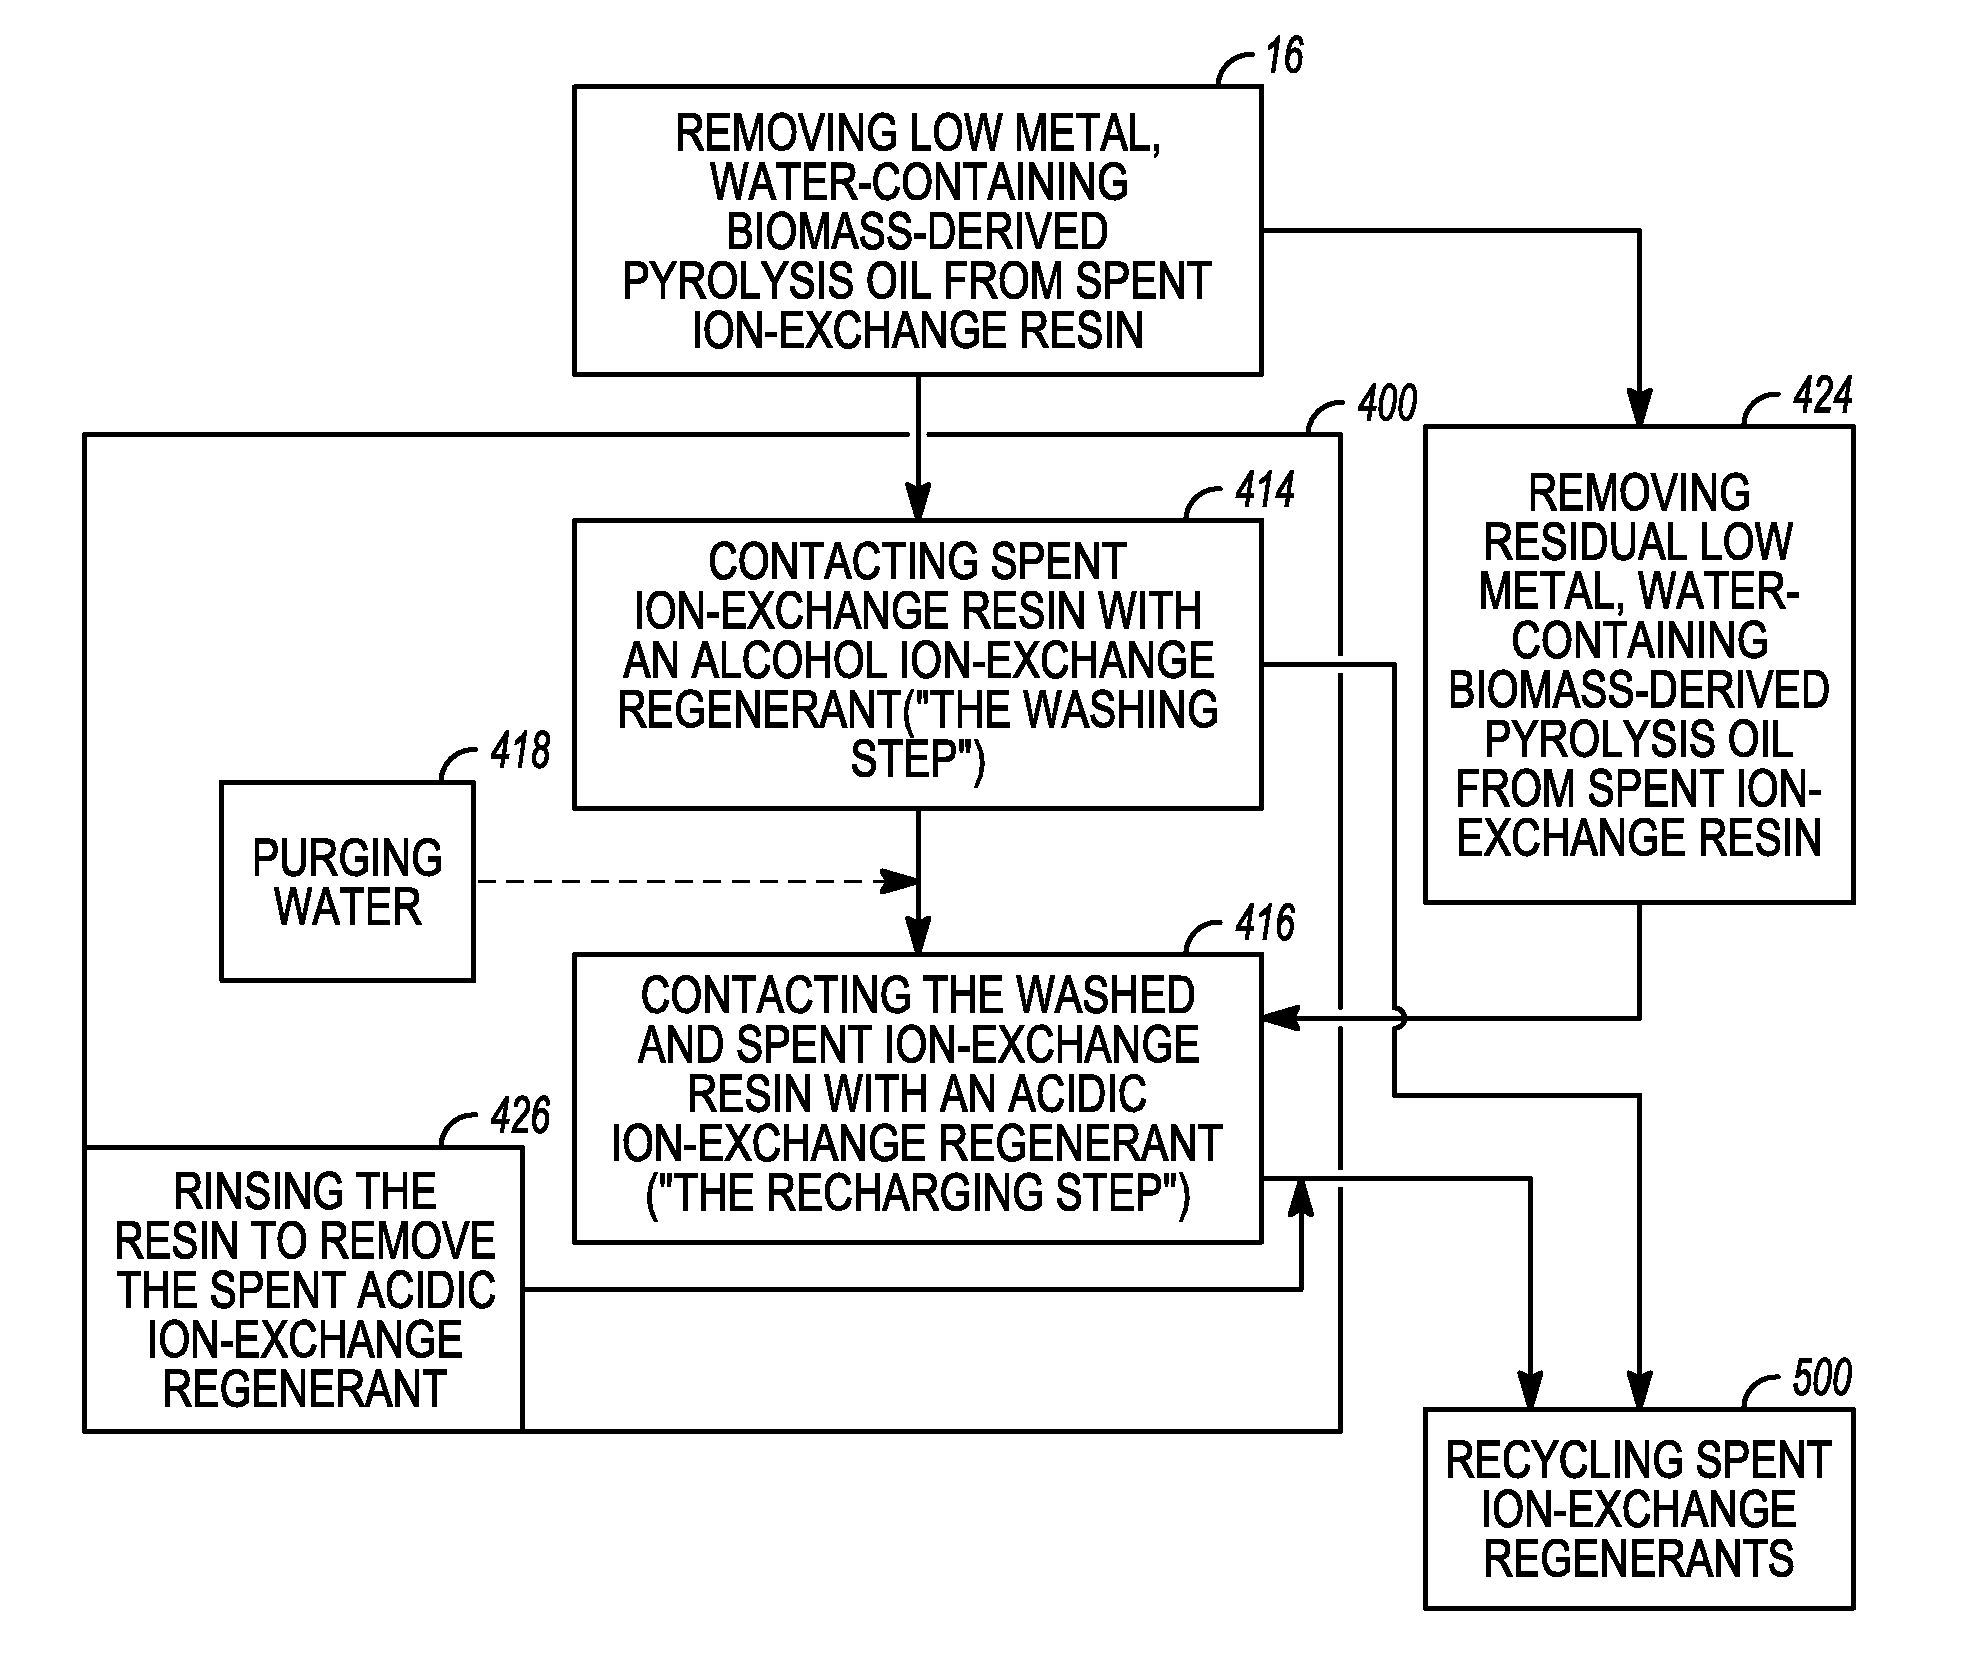 Low metal, low water biomass-derived pyrolysis oils and methods for producing the same